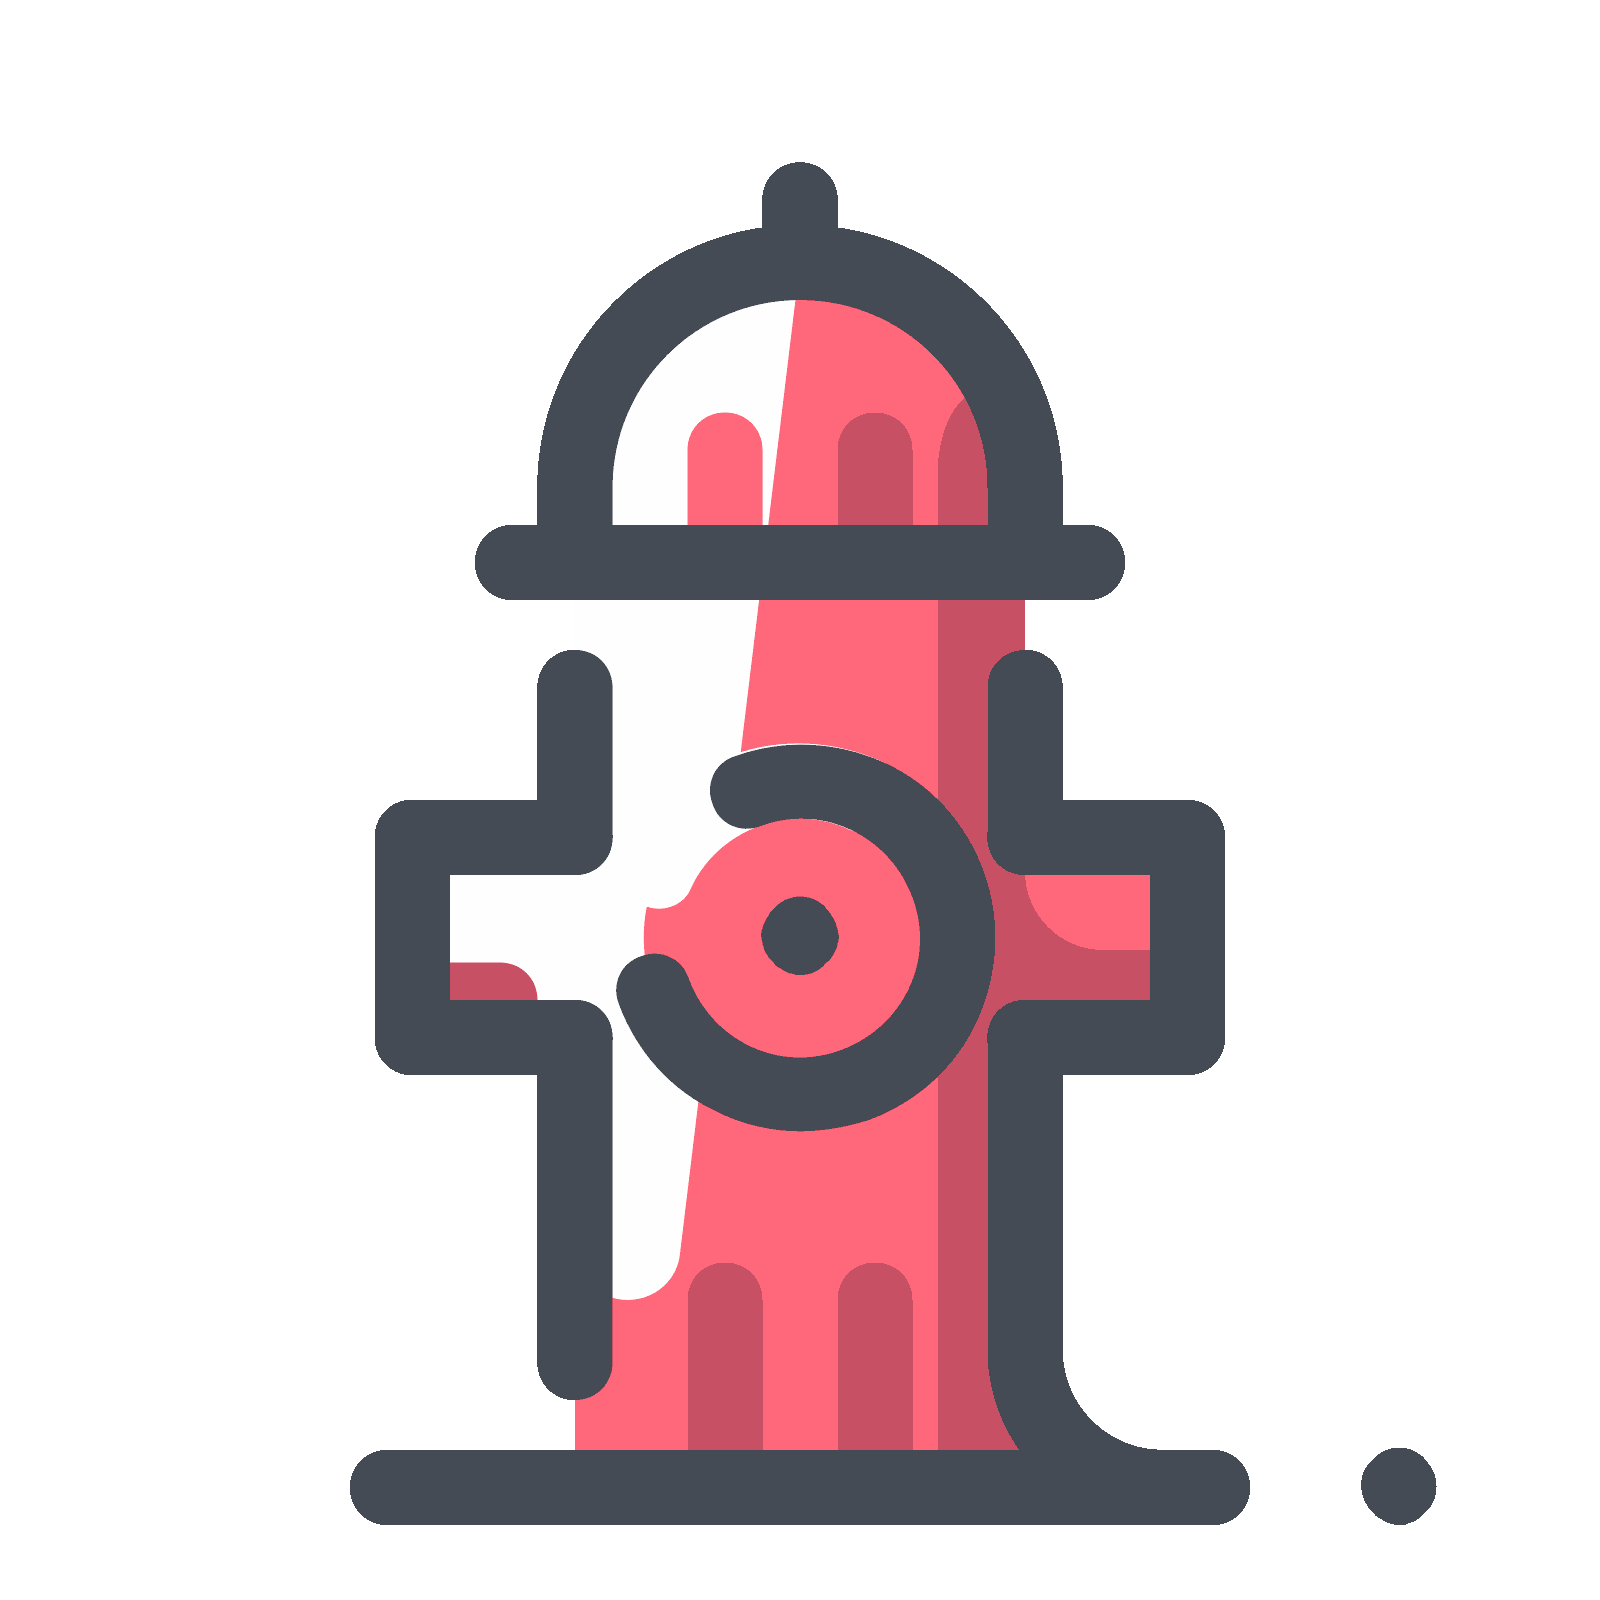 Fire-hydrant icons | Noun Project